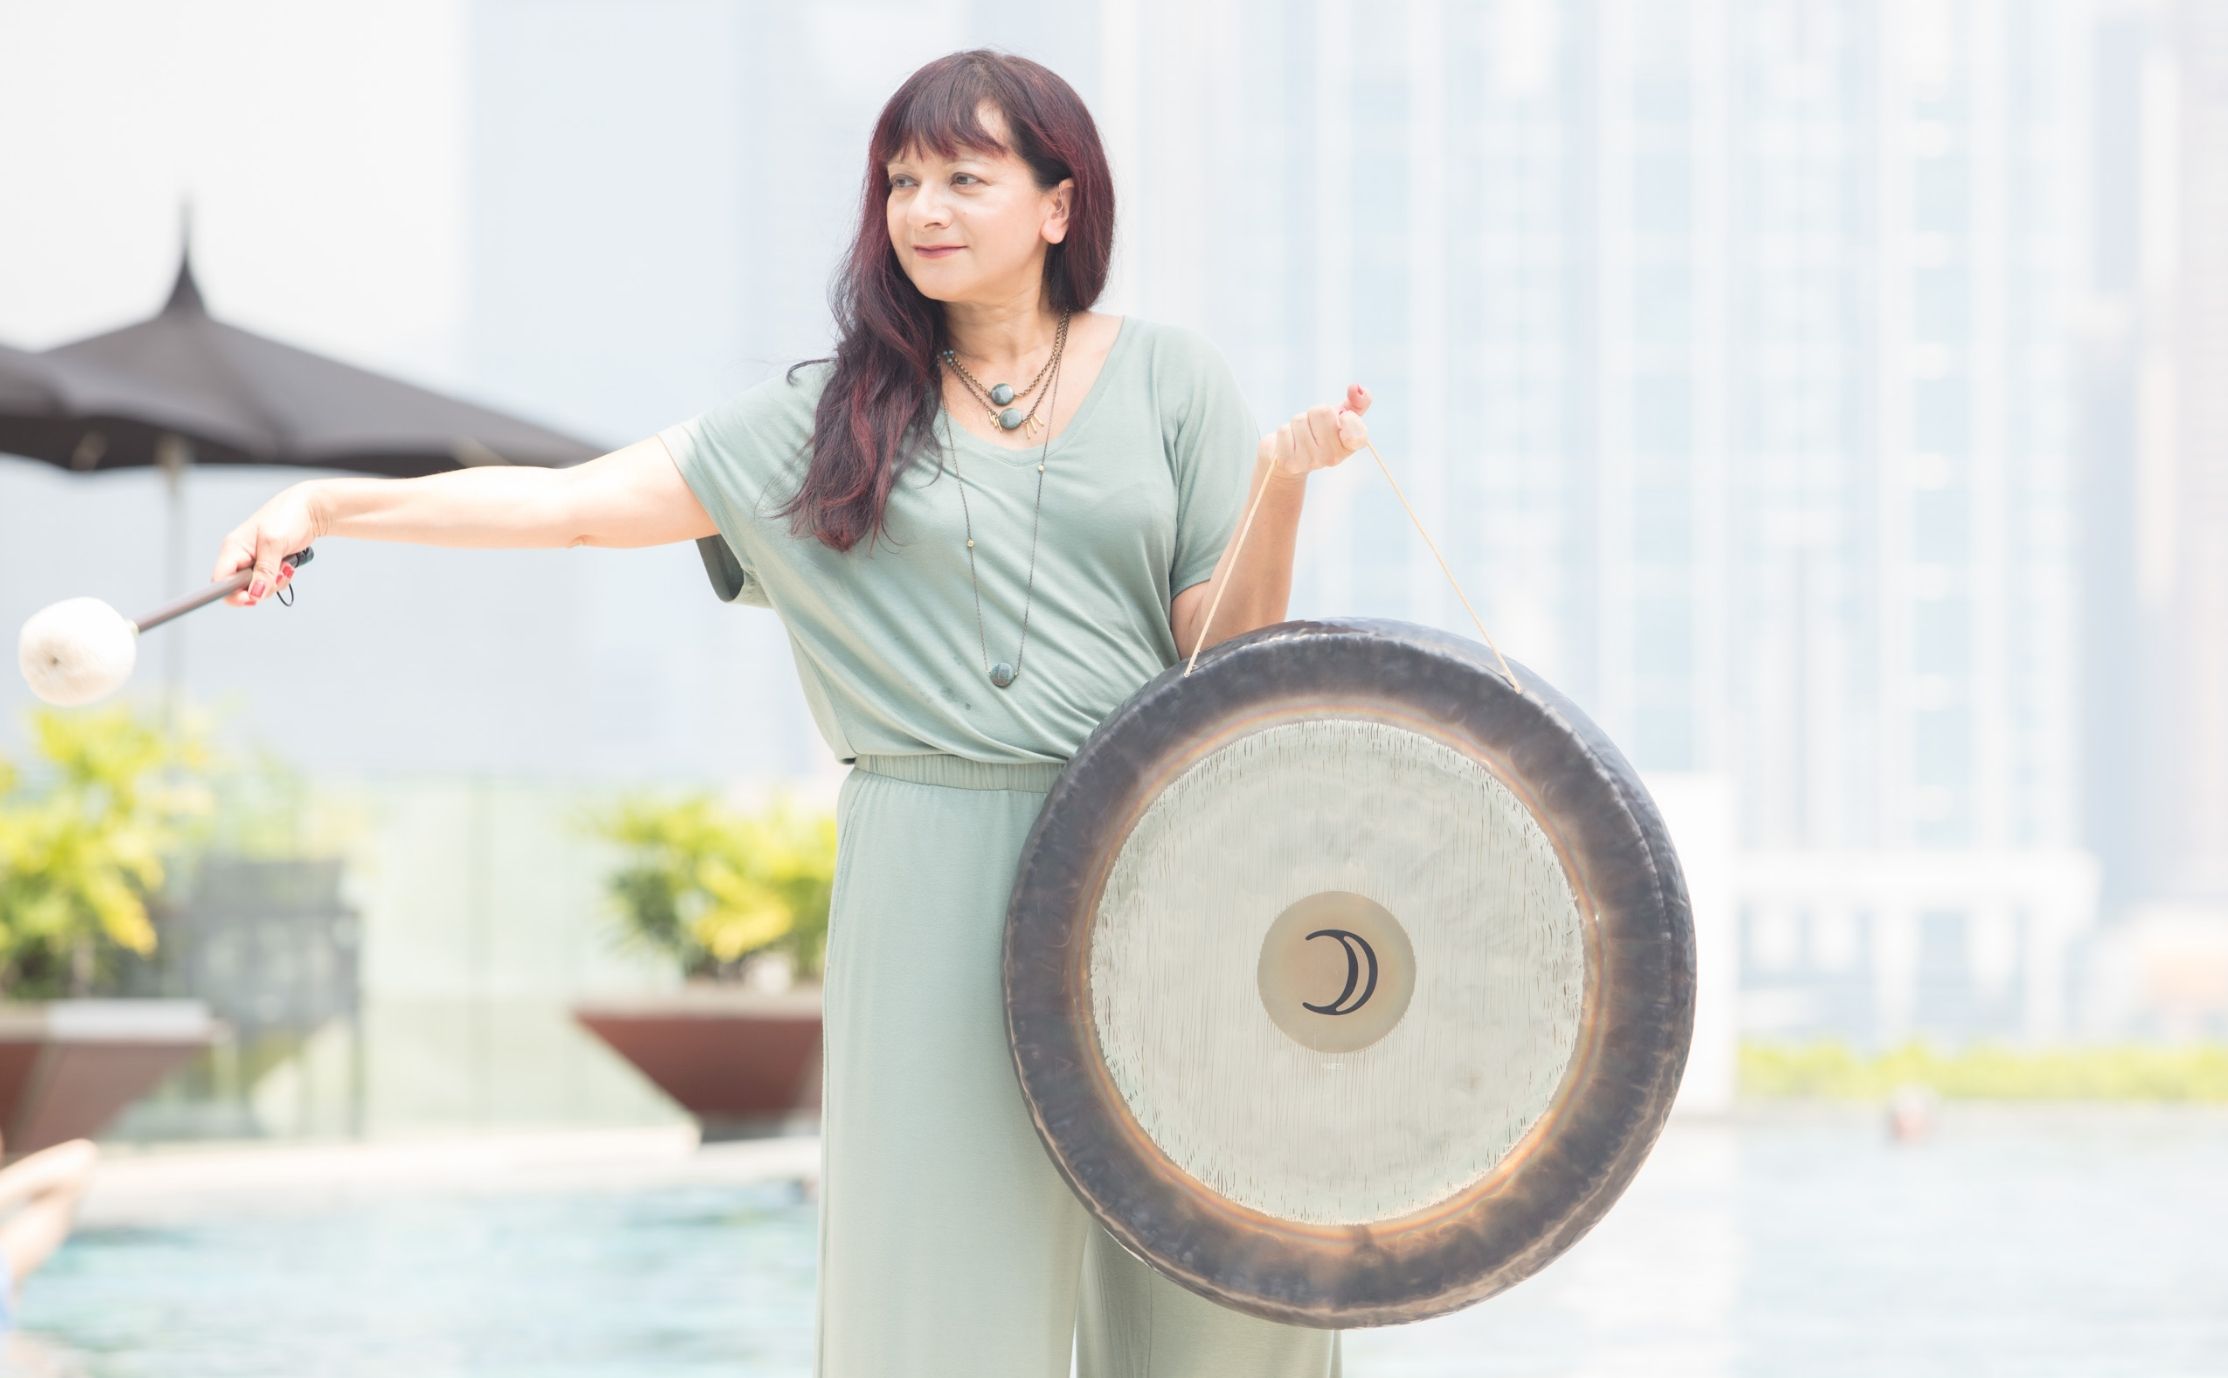 A woman in a green top and pants holding a gong in one hand and a mallet with a stretched out hand in the other